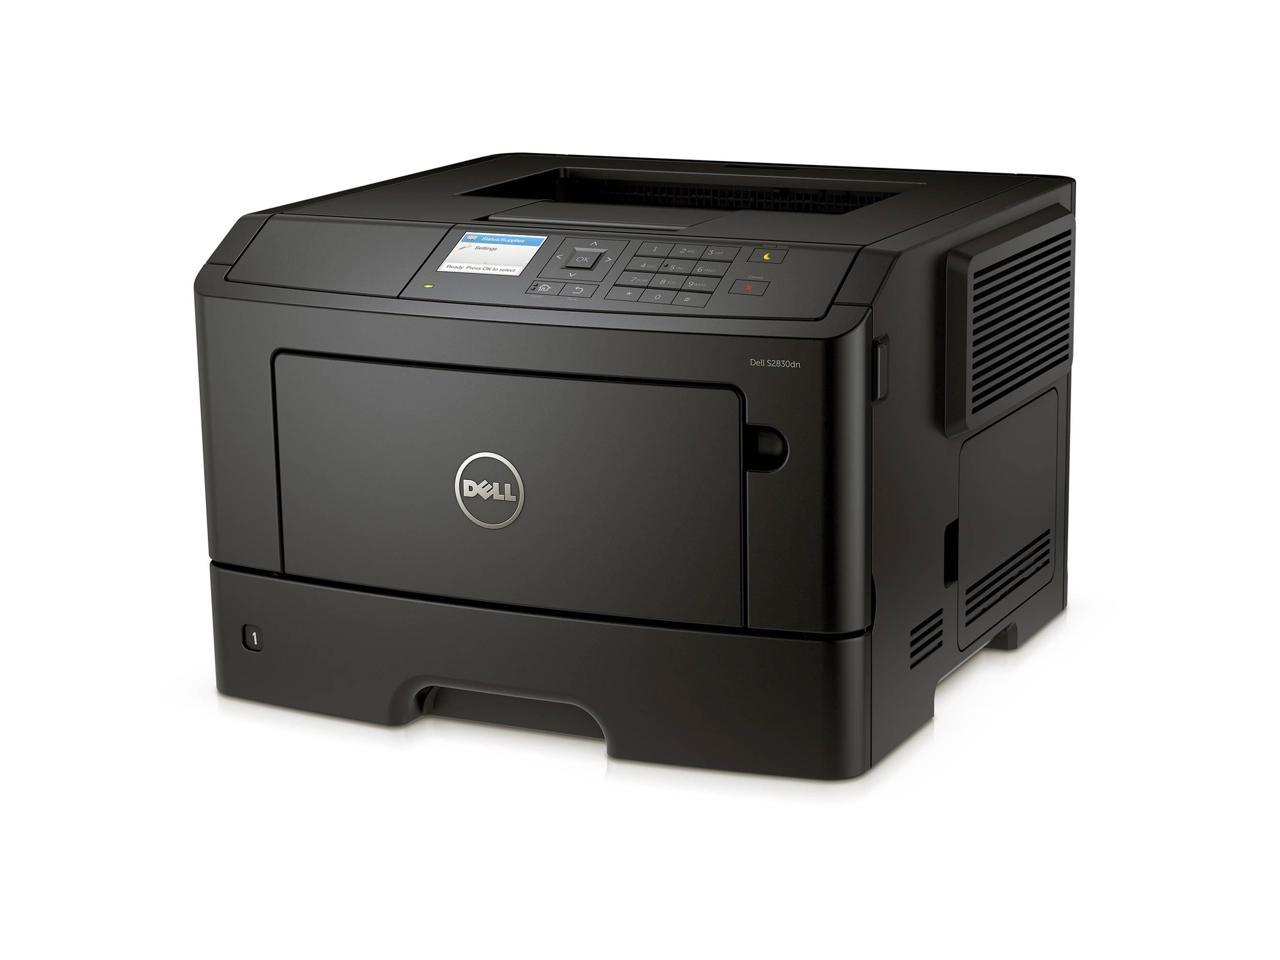 dell b2360dn printer stops working